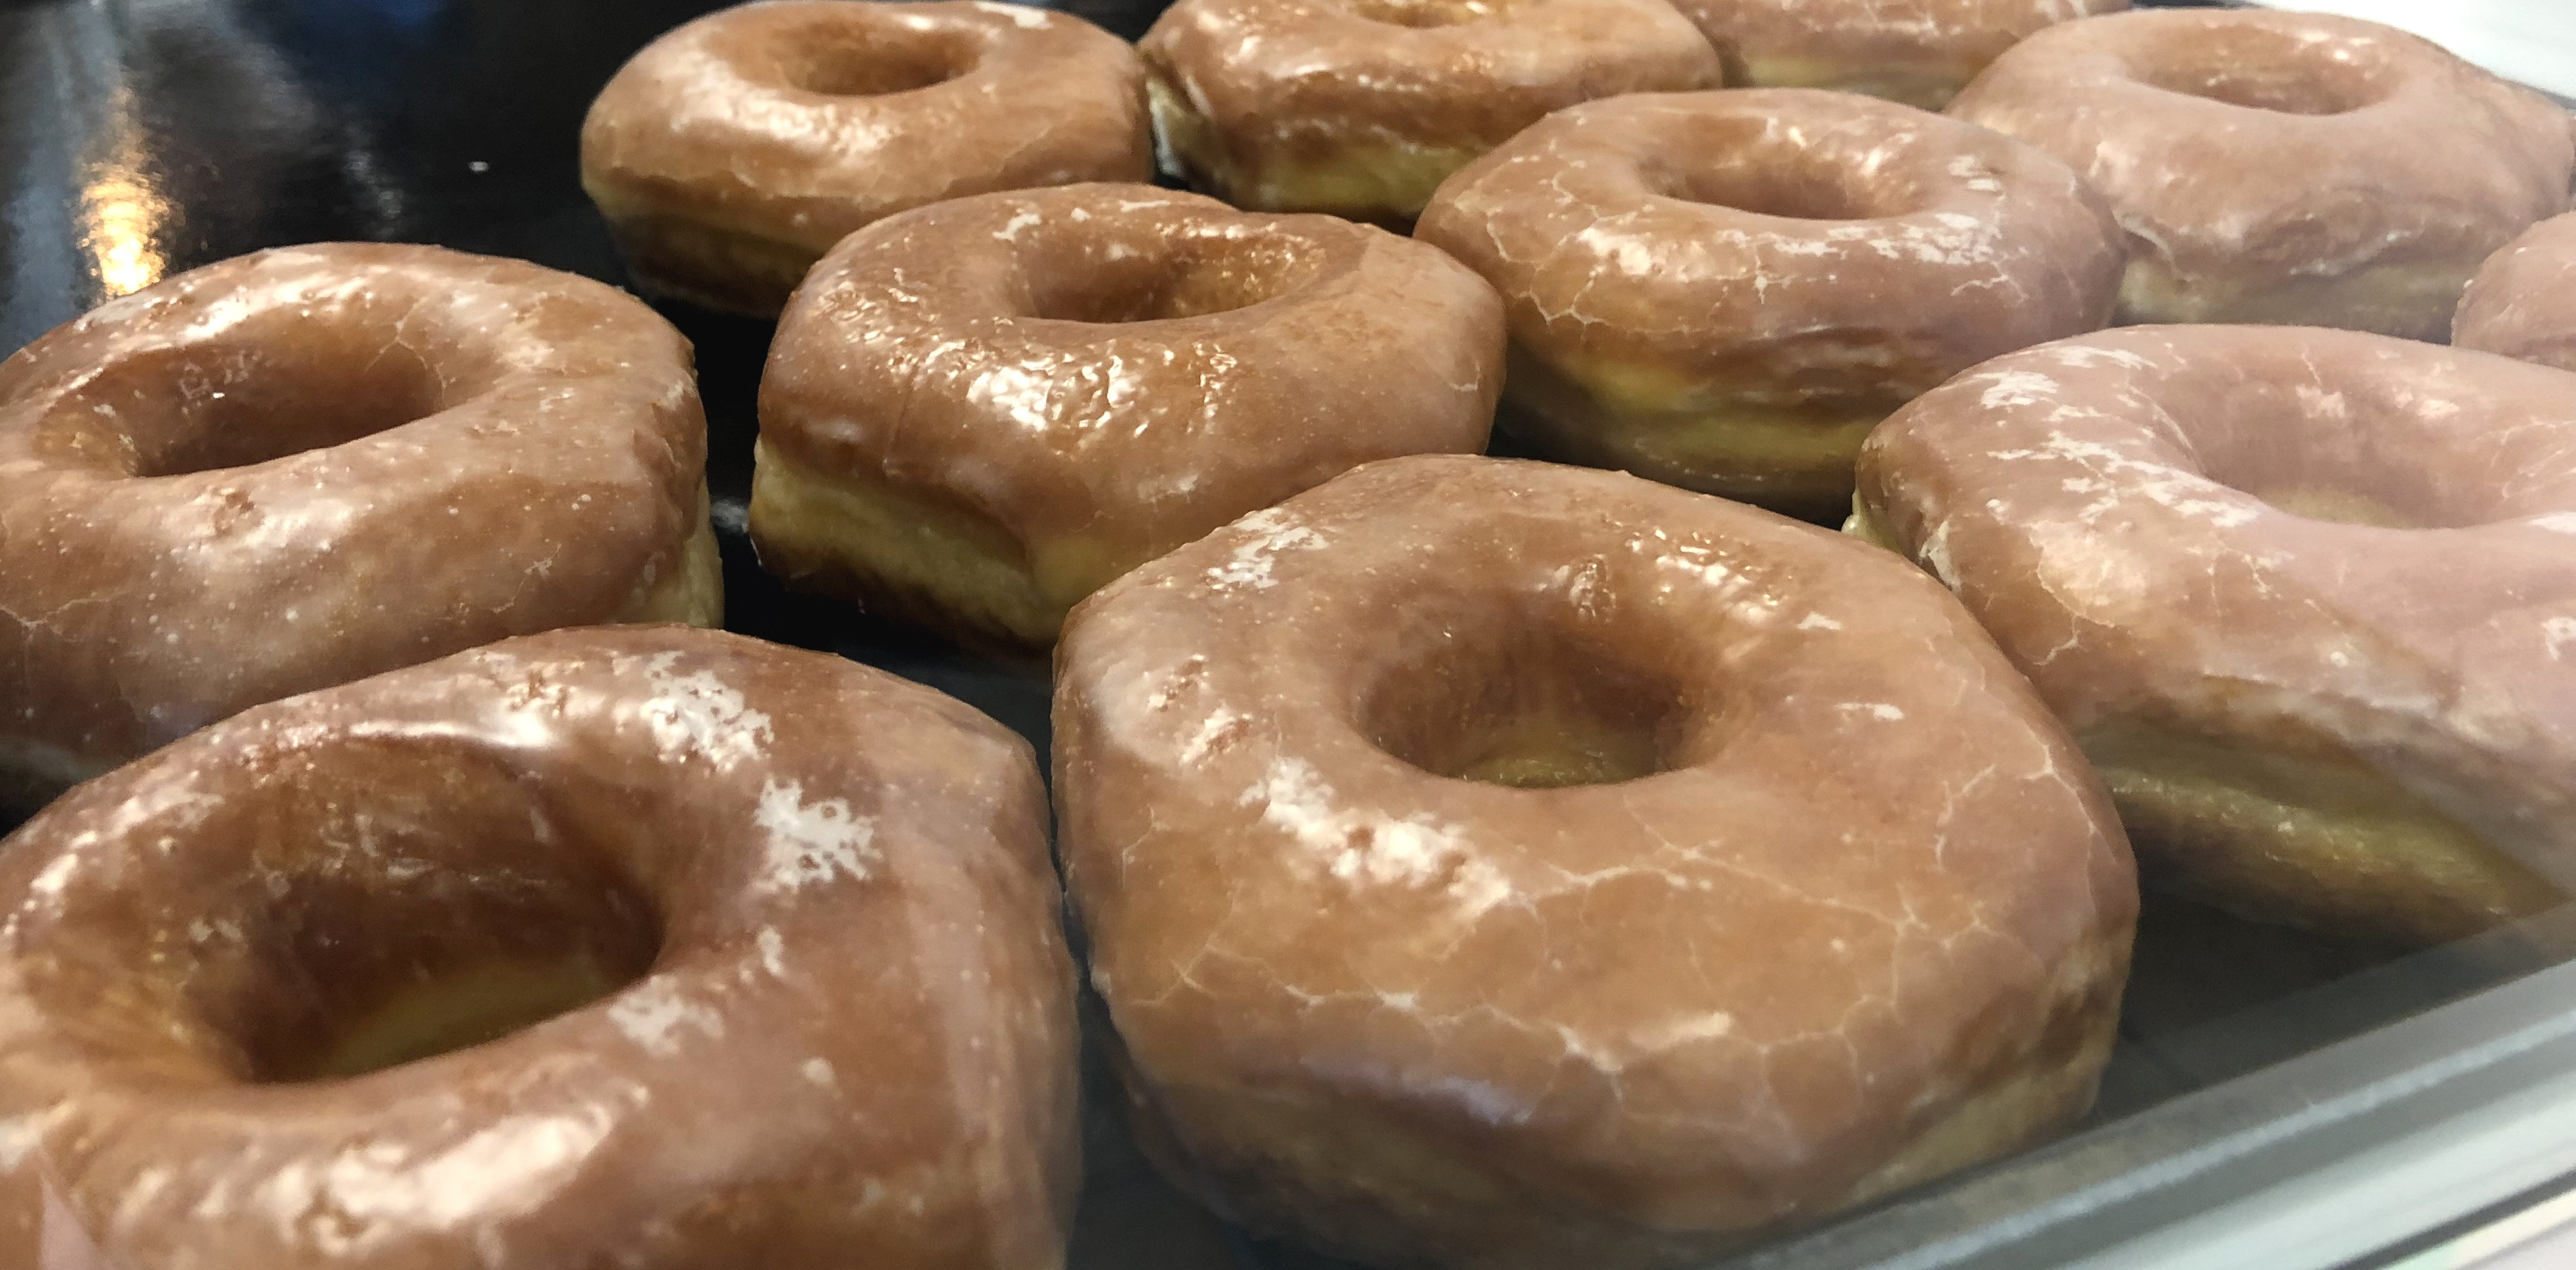 What are your National Doughnut Day plans?